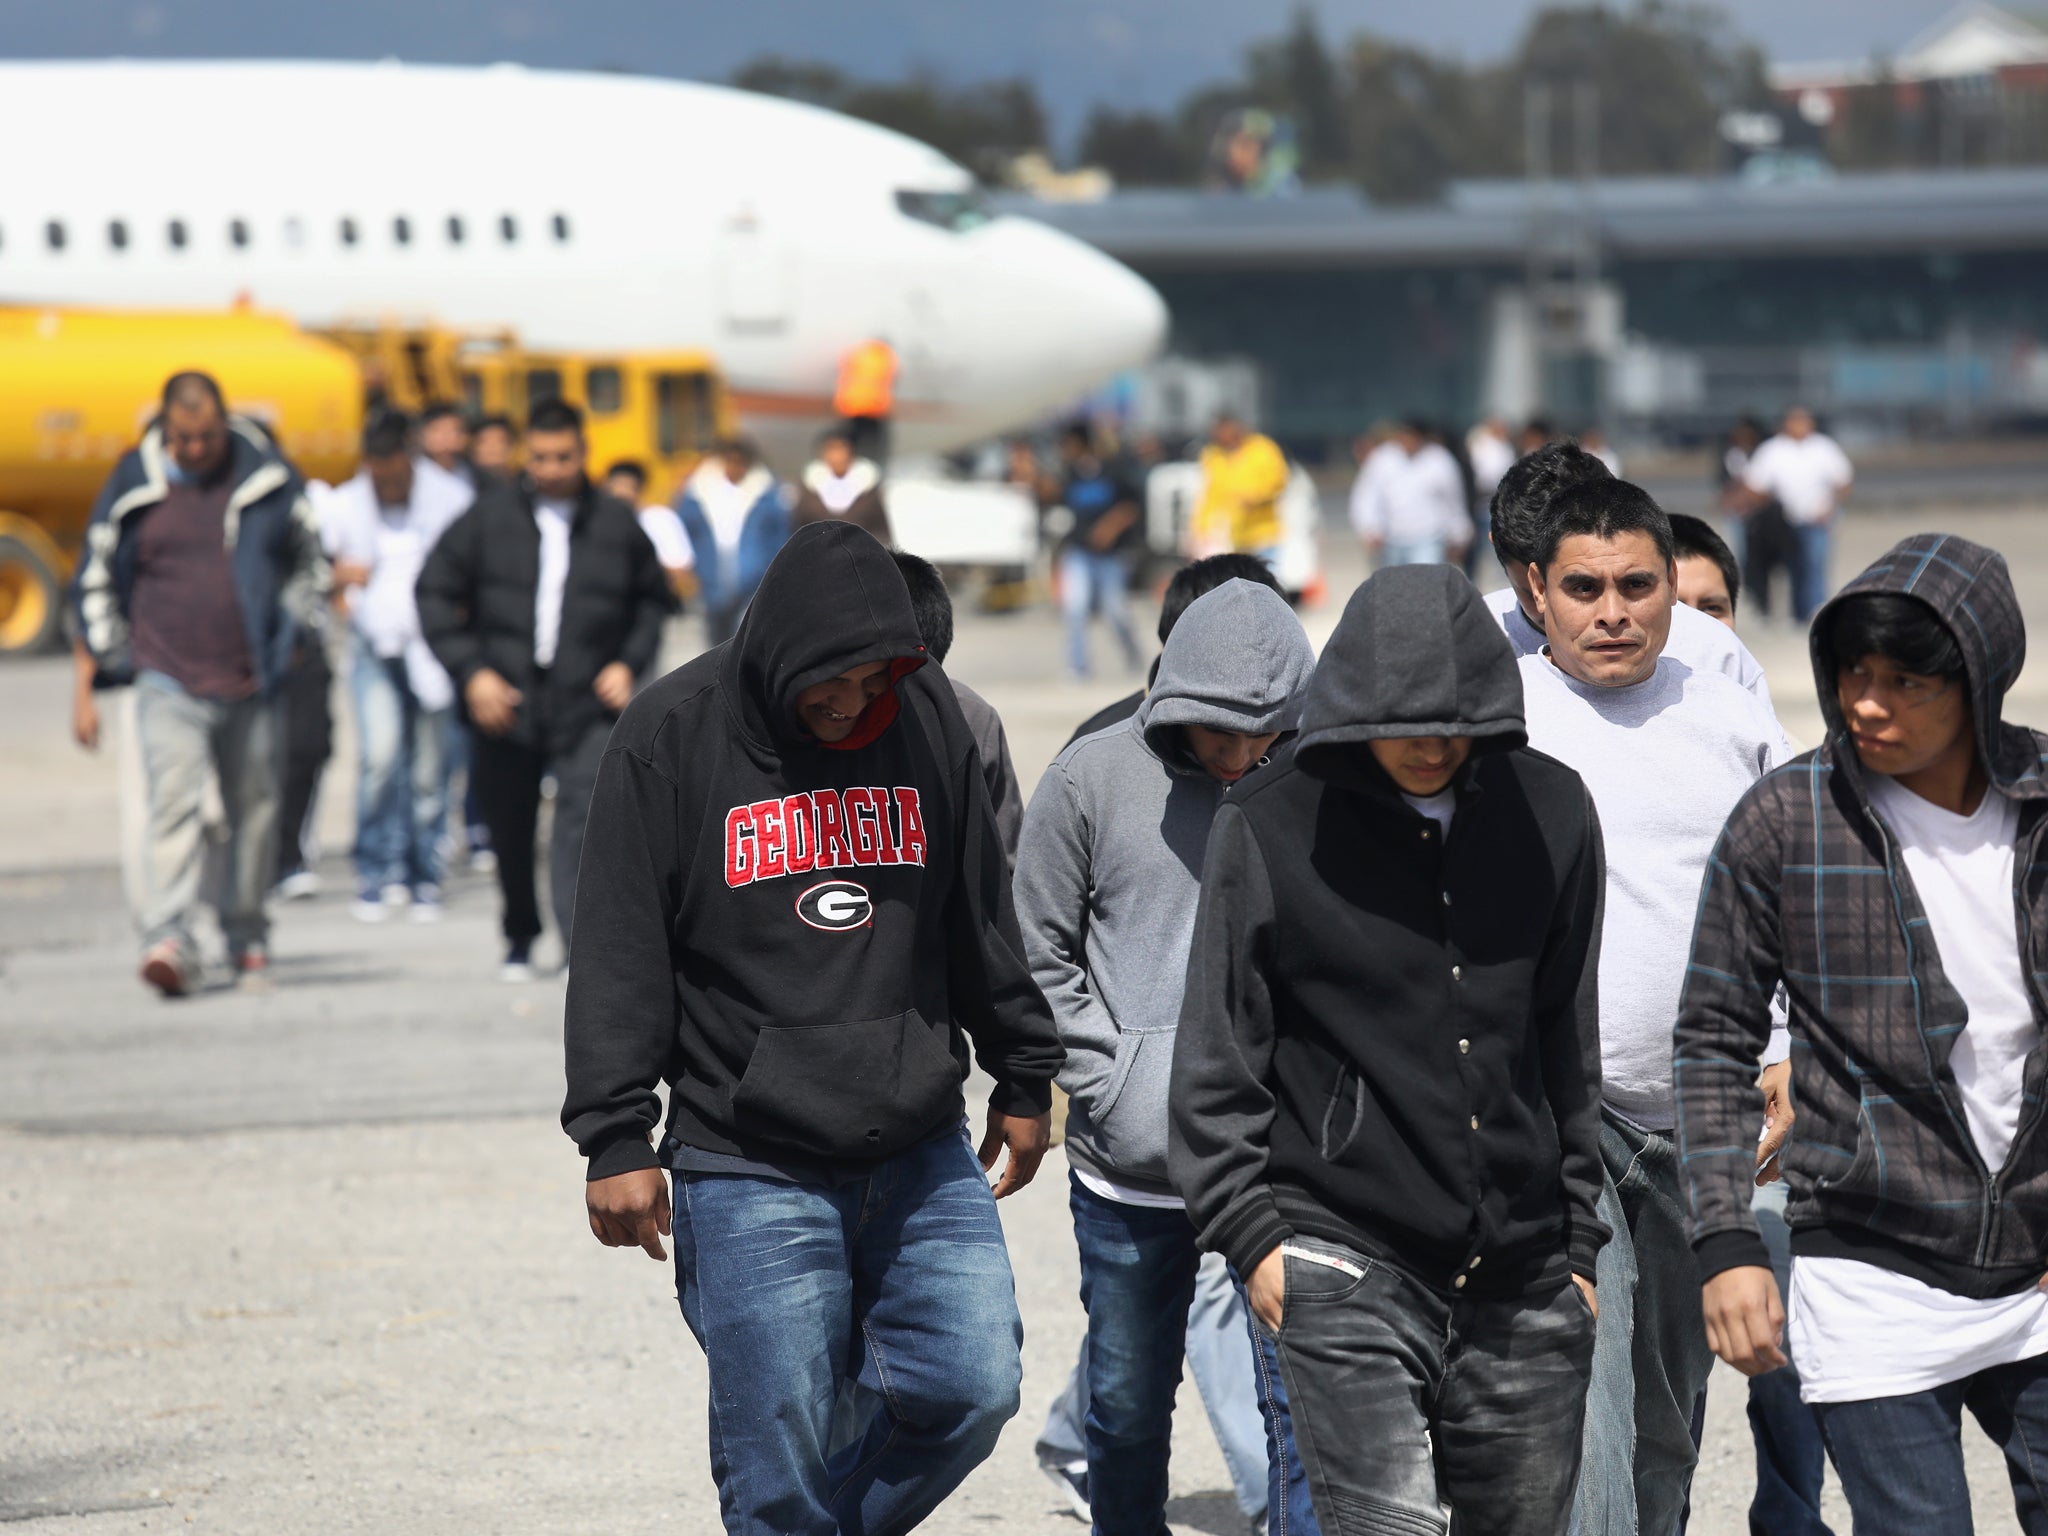 Guatemalan immigrants arrive in their home country on a deportation flight from the US this month